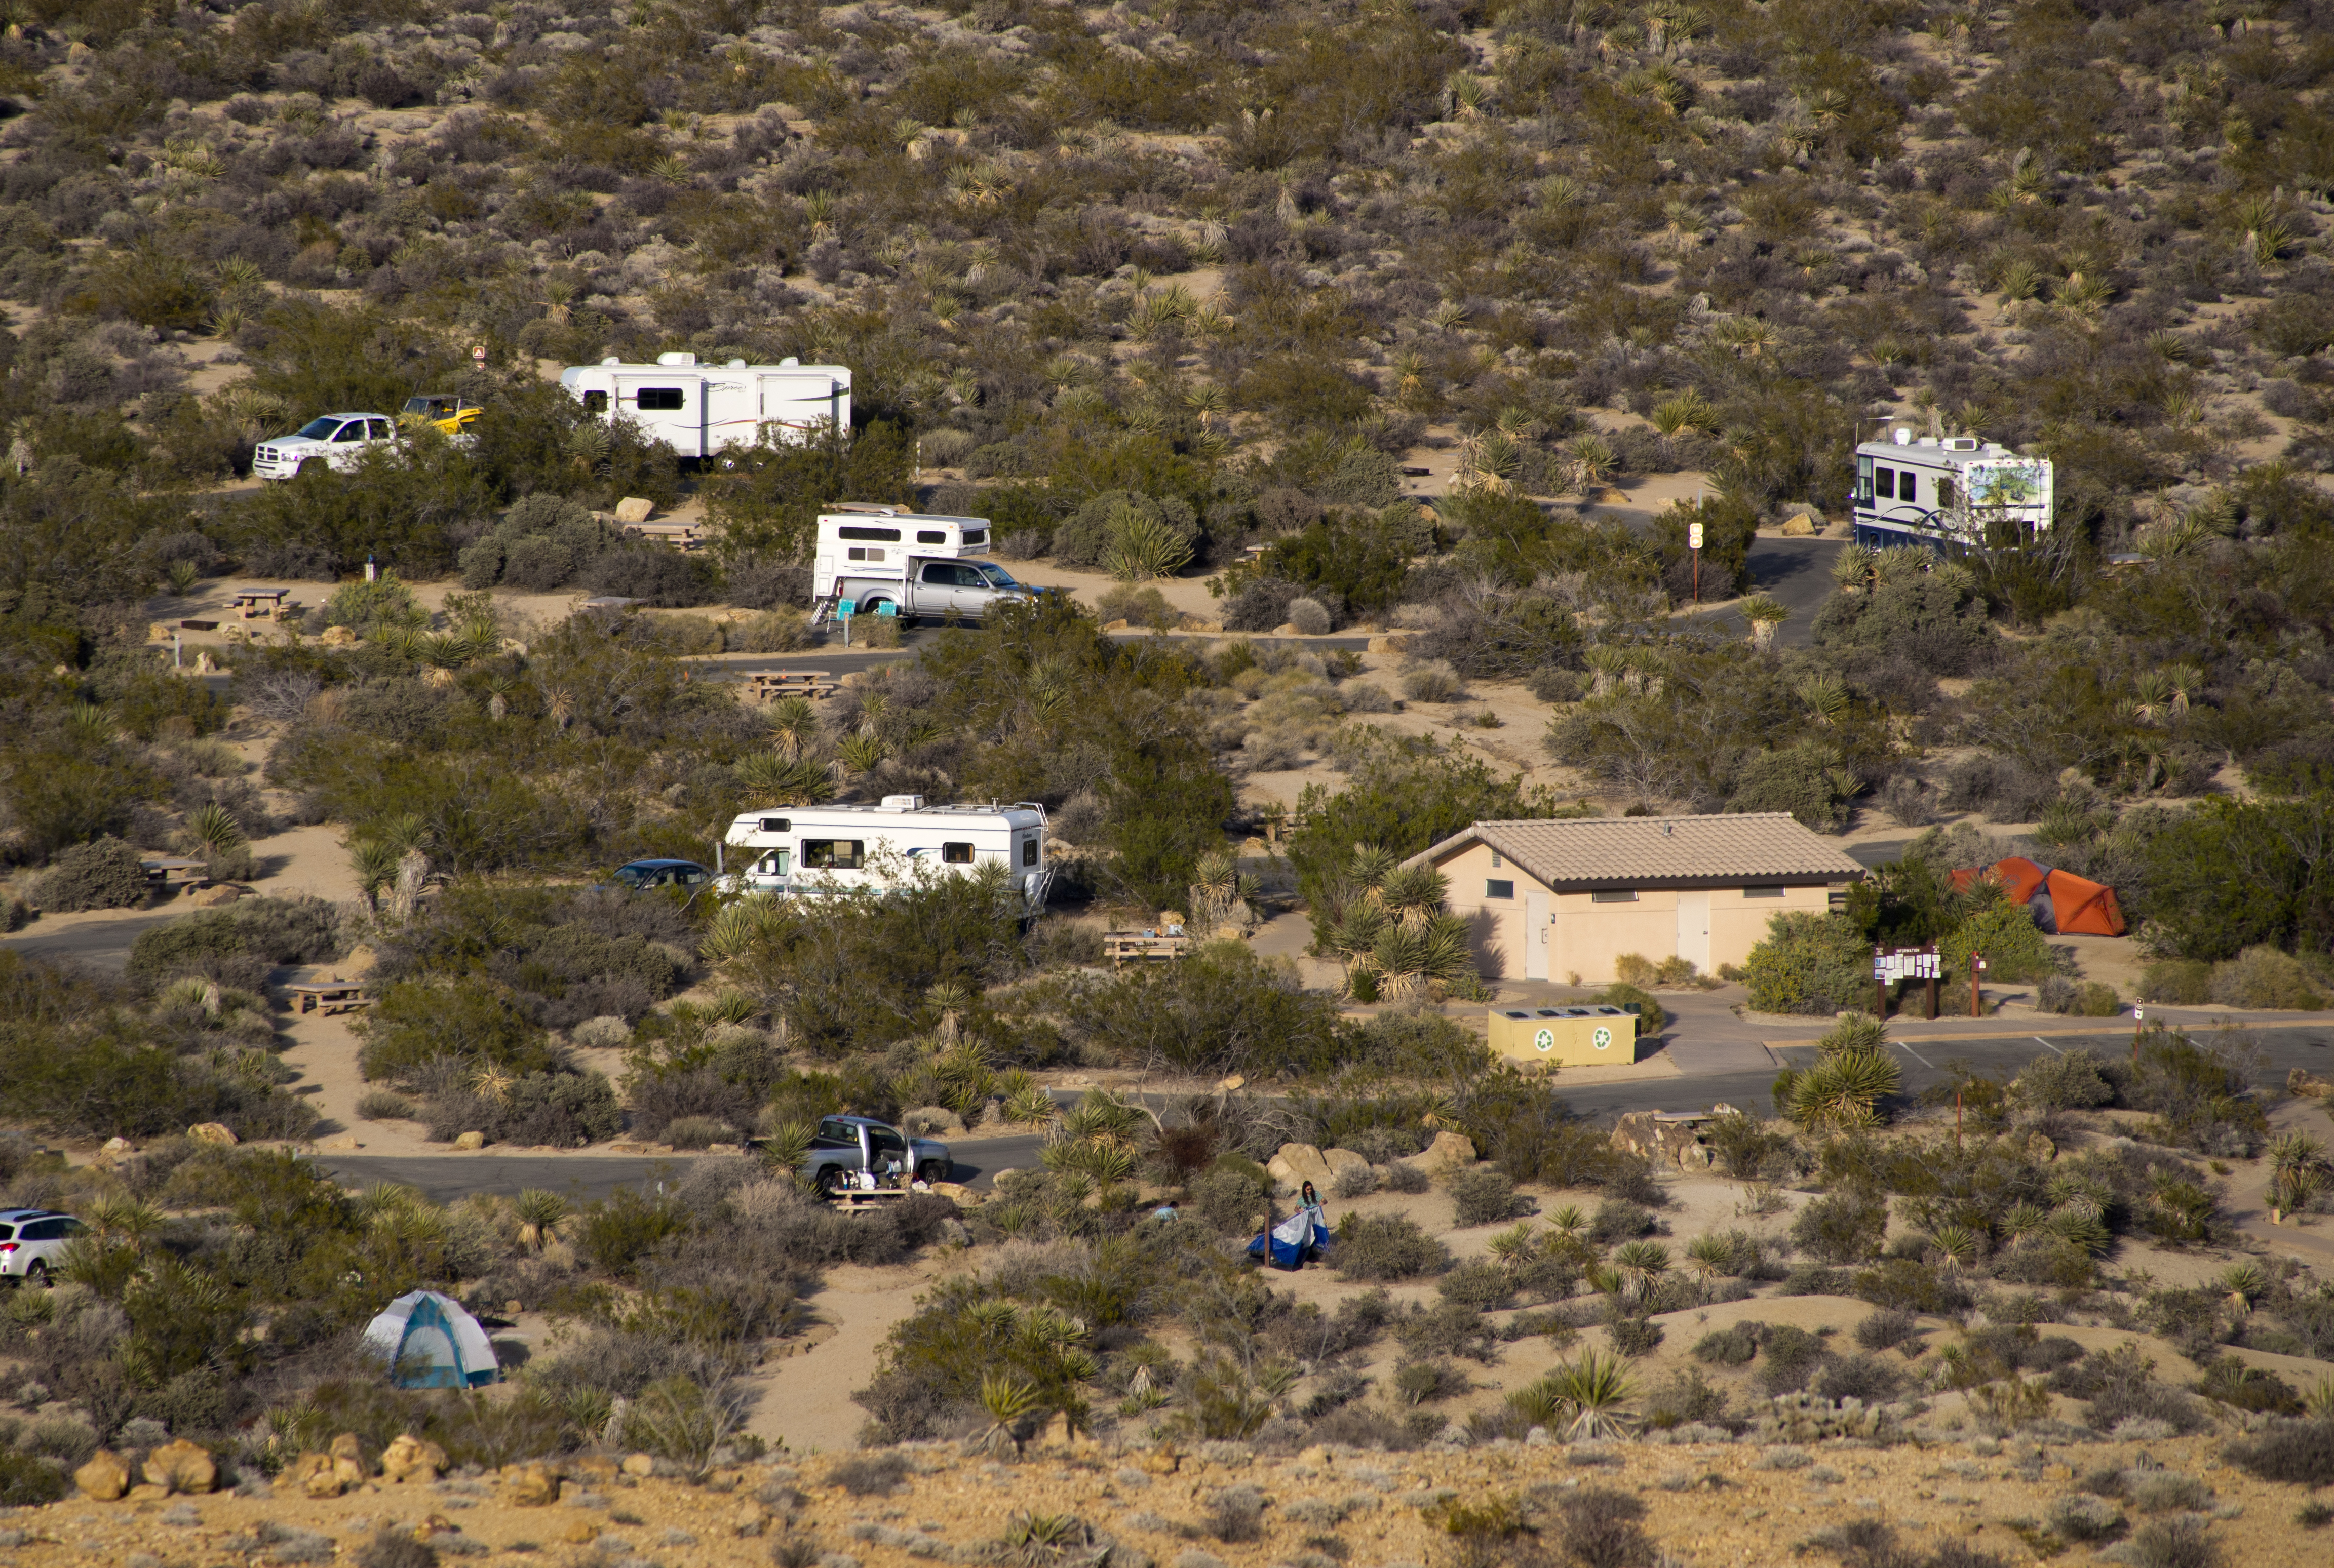 A view looking down onto the Cottonwood Campground showing the bathrooms, tent sites and RV sites.